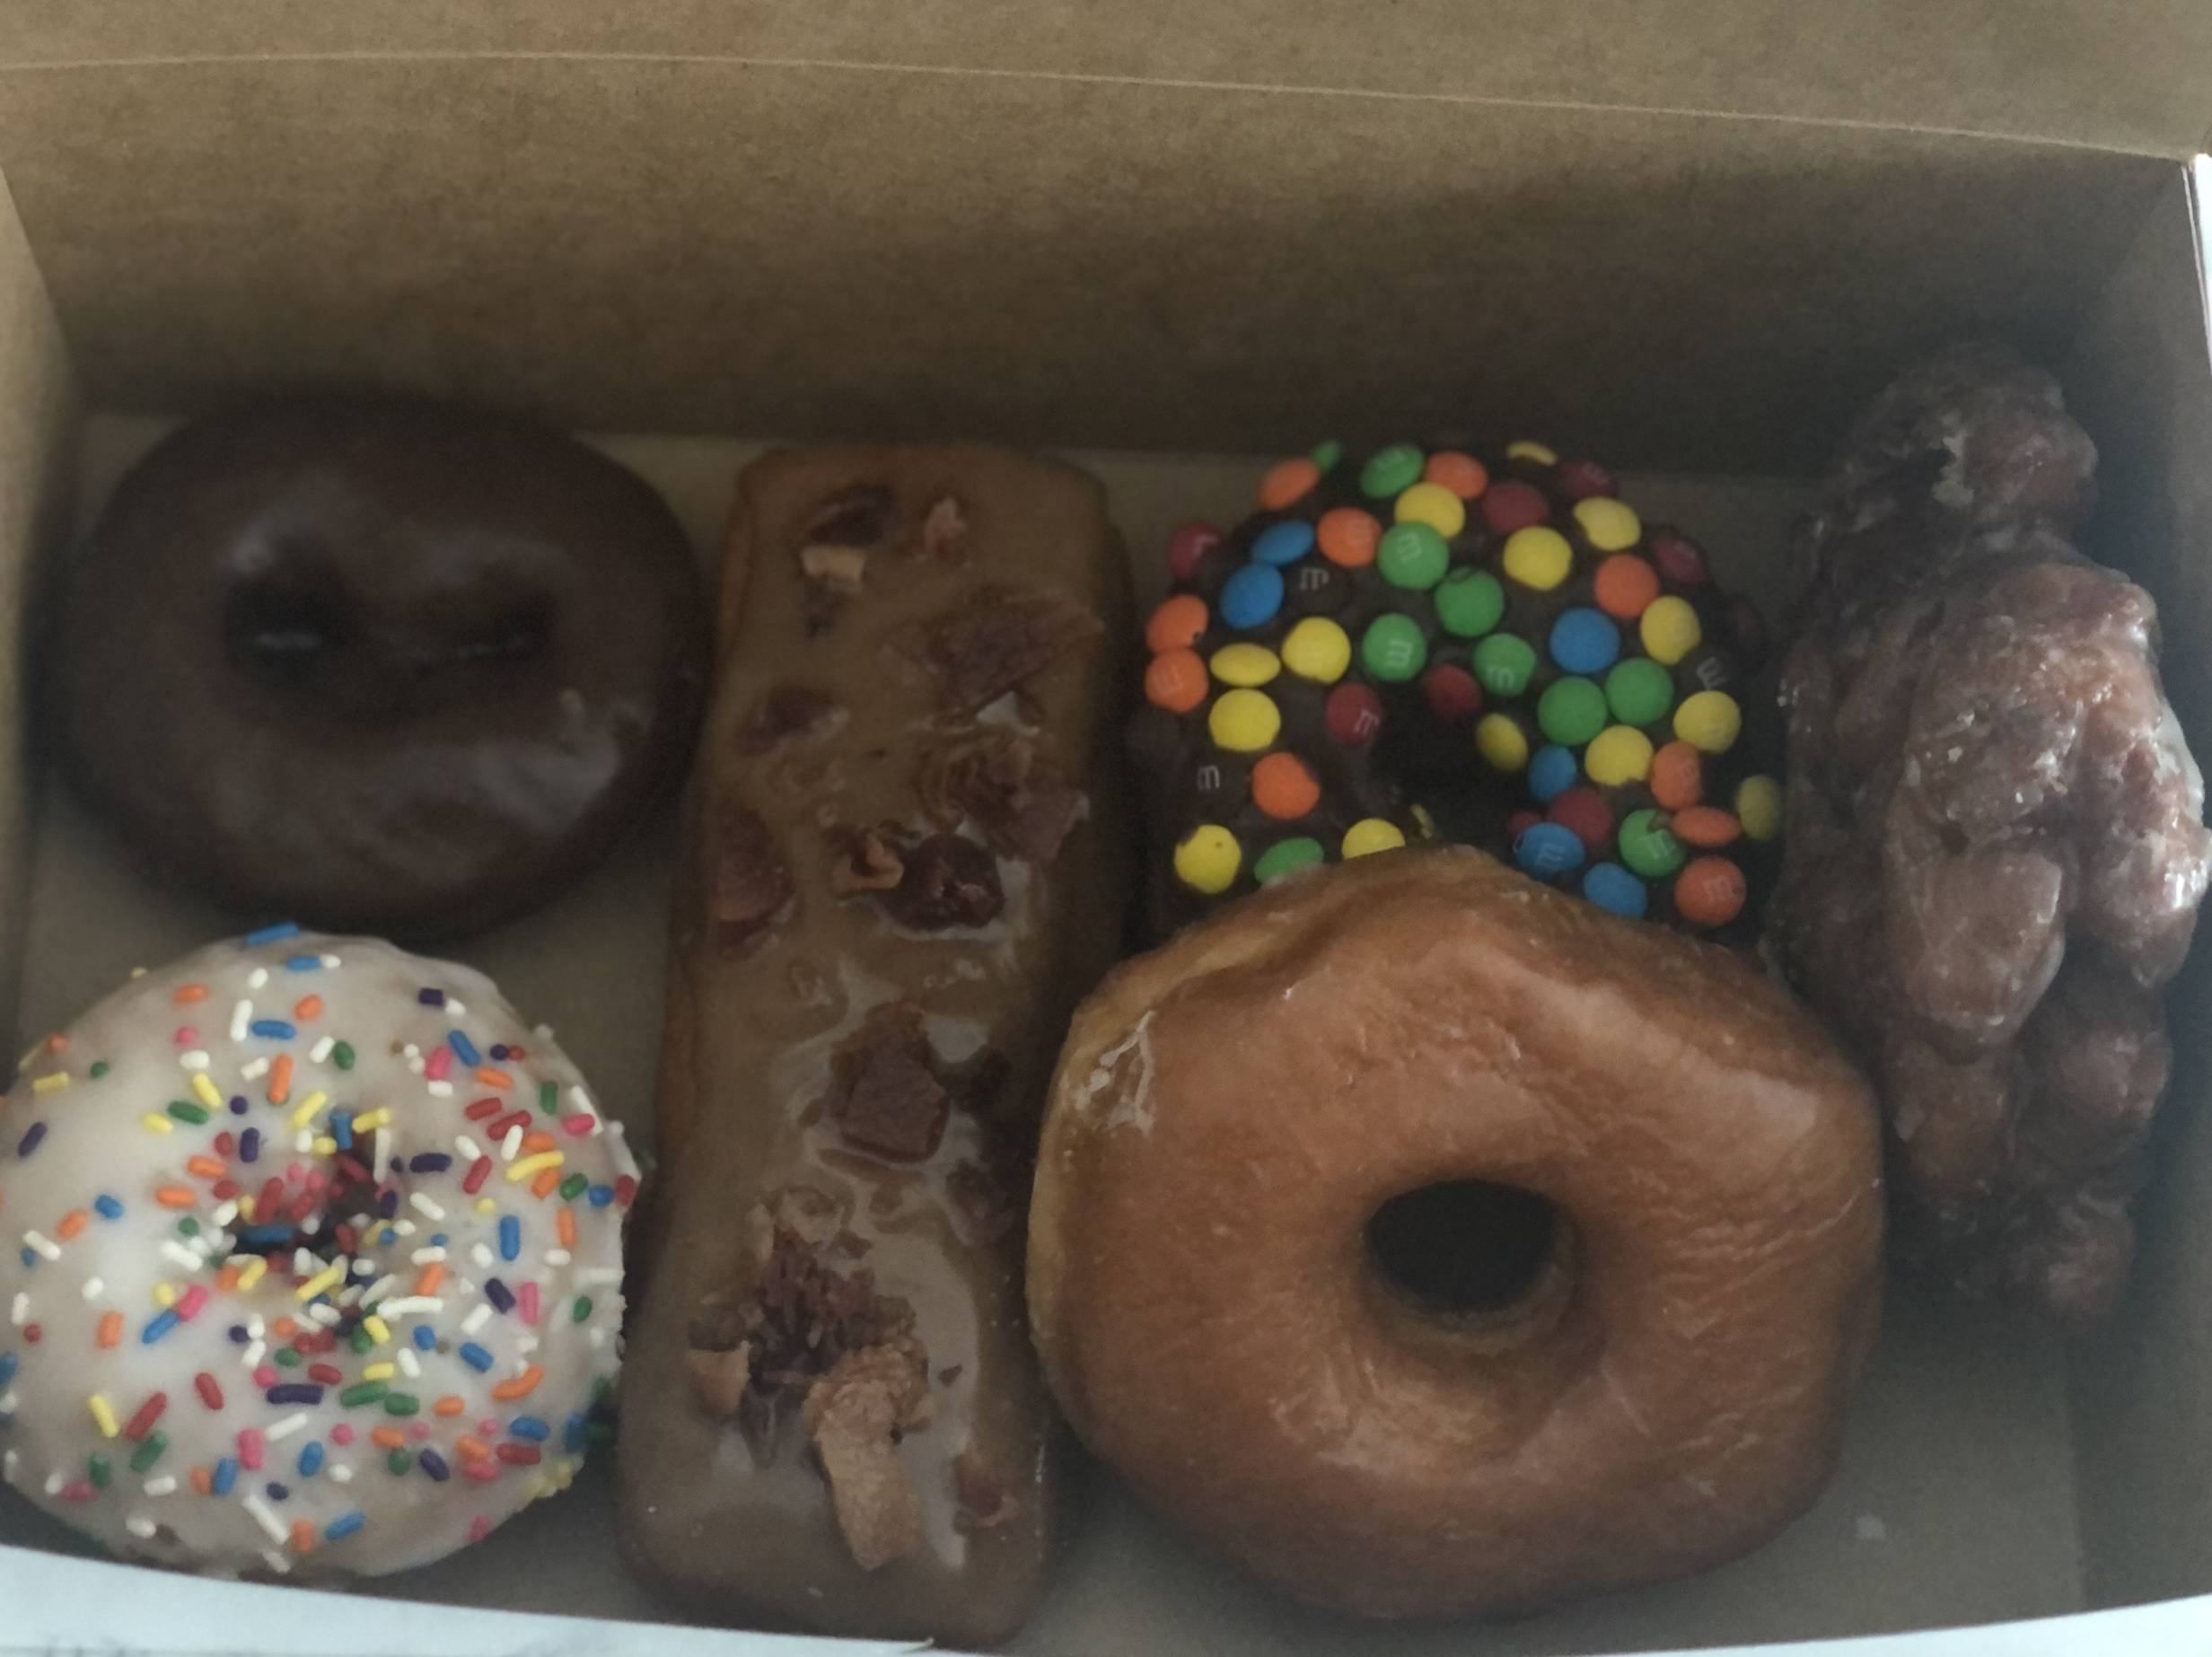 Six assorted donuts in a paper box. Photo by Alyssa Buckley.